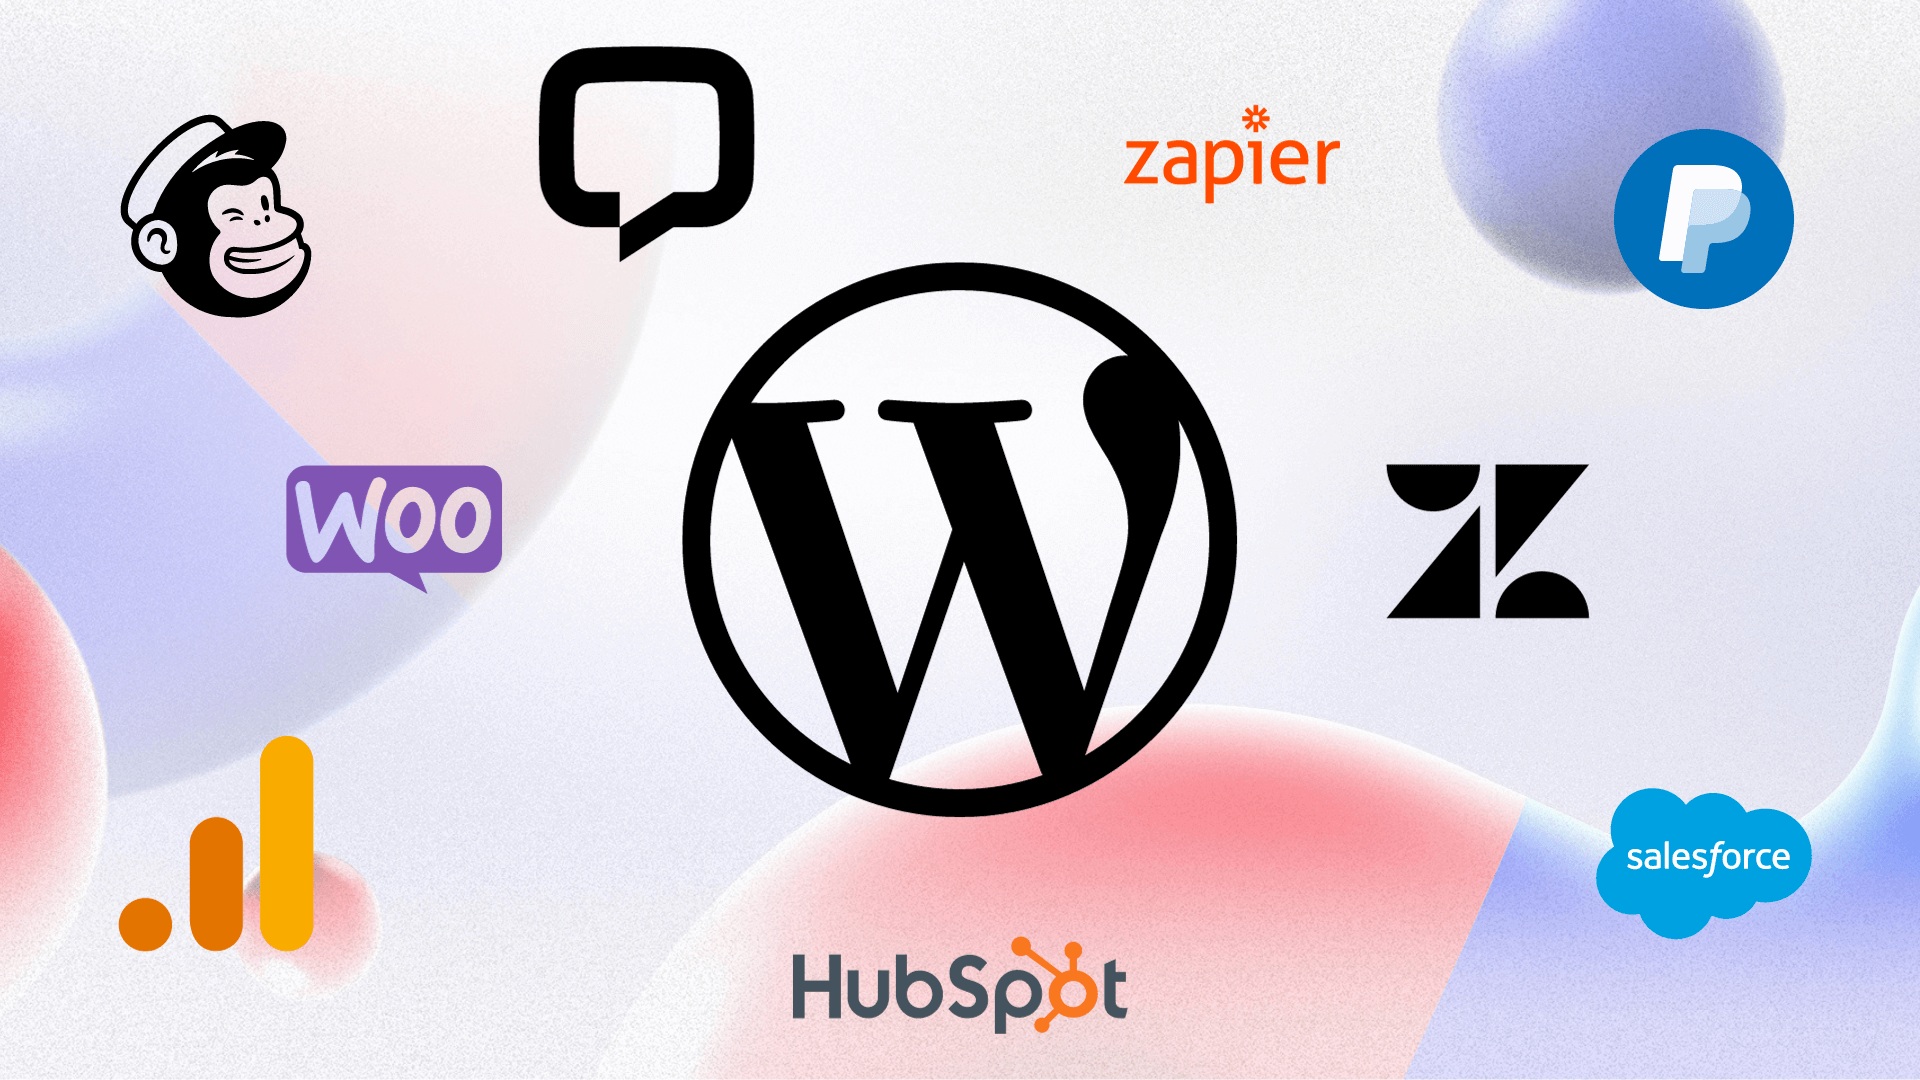 osom studio is able to develop wordpress integrations with other tools such as crms, marketing automation tools or other